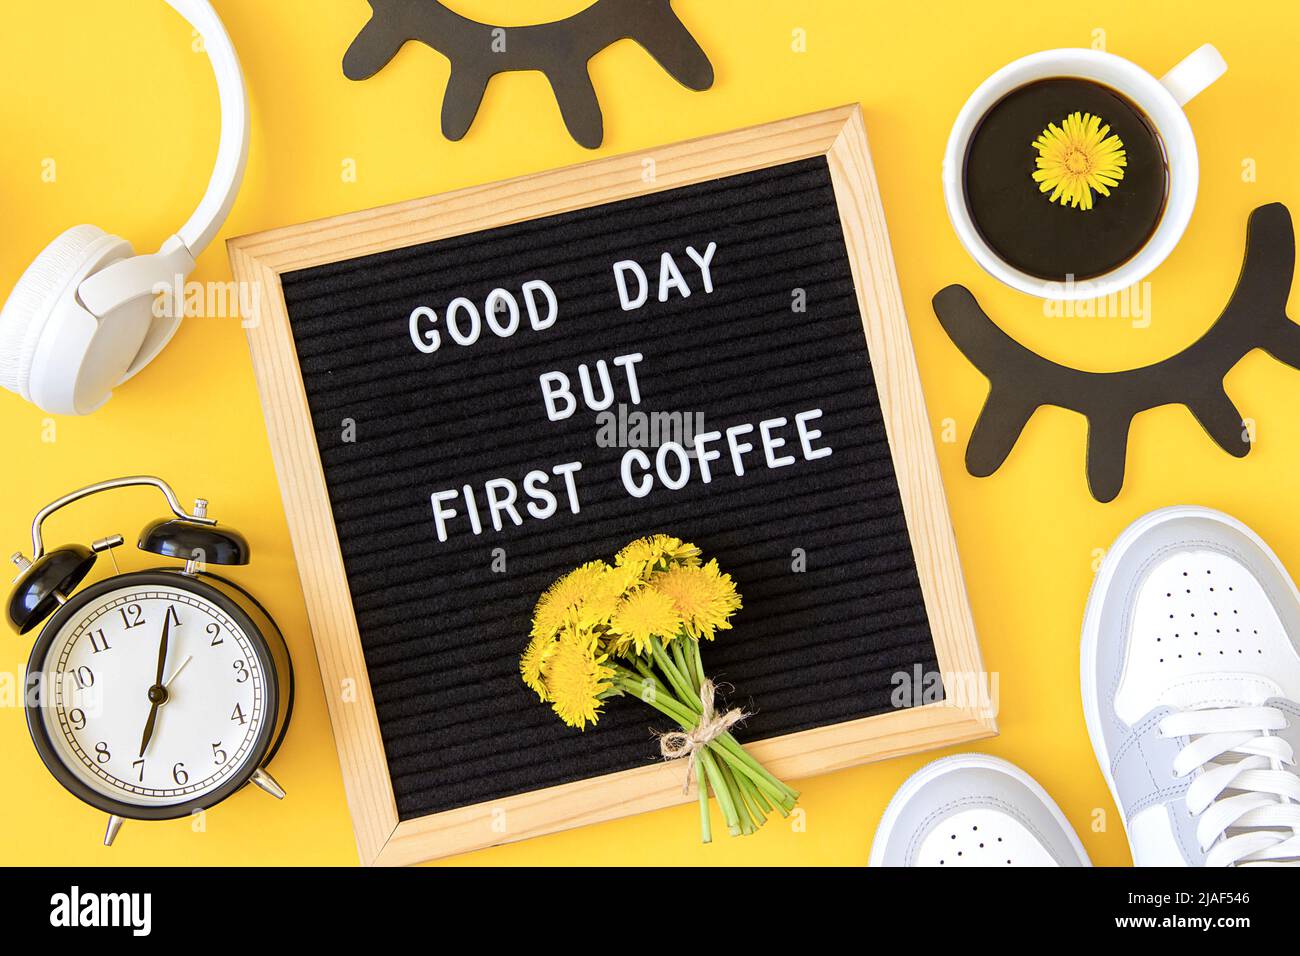 Good day but first coffee. Motivational quote on letter board, bouquet yellow flowers and cup of coffee on yellow background. Concept inspirational qu Stock Photo